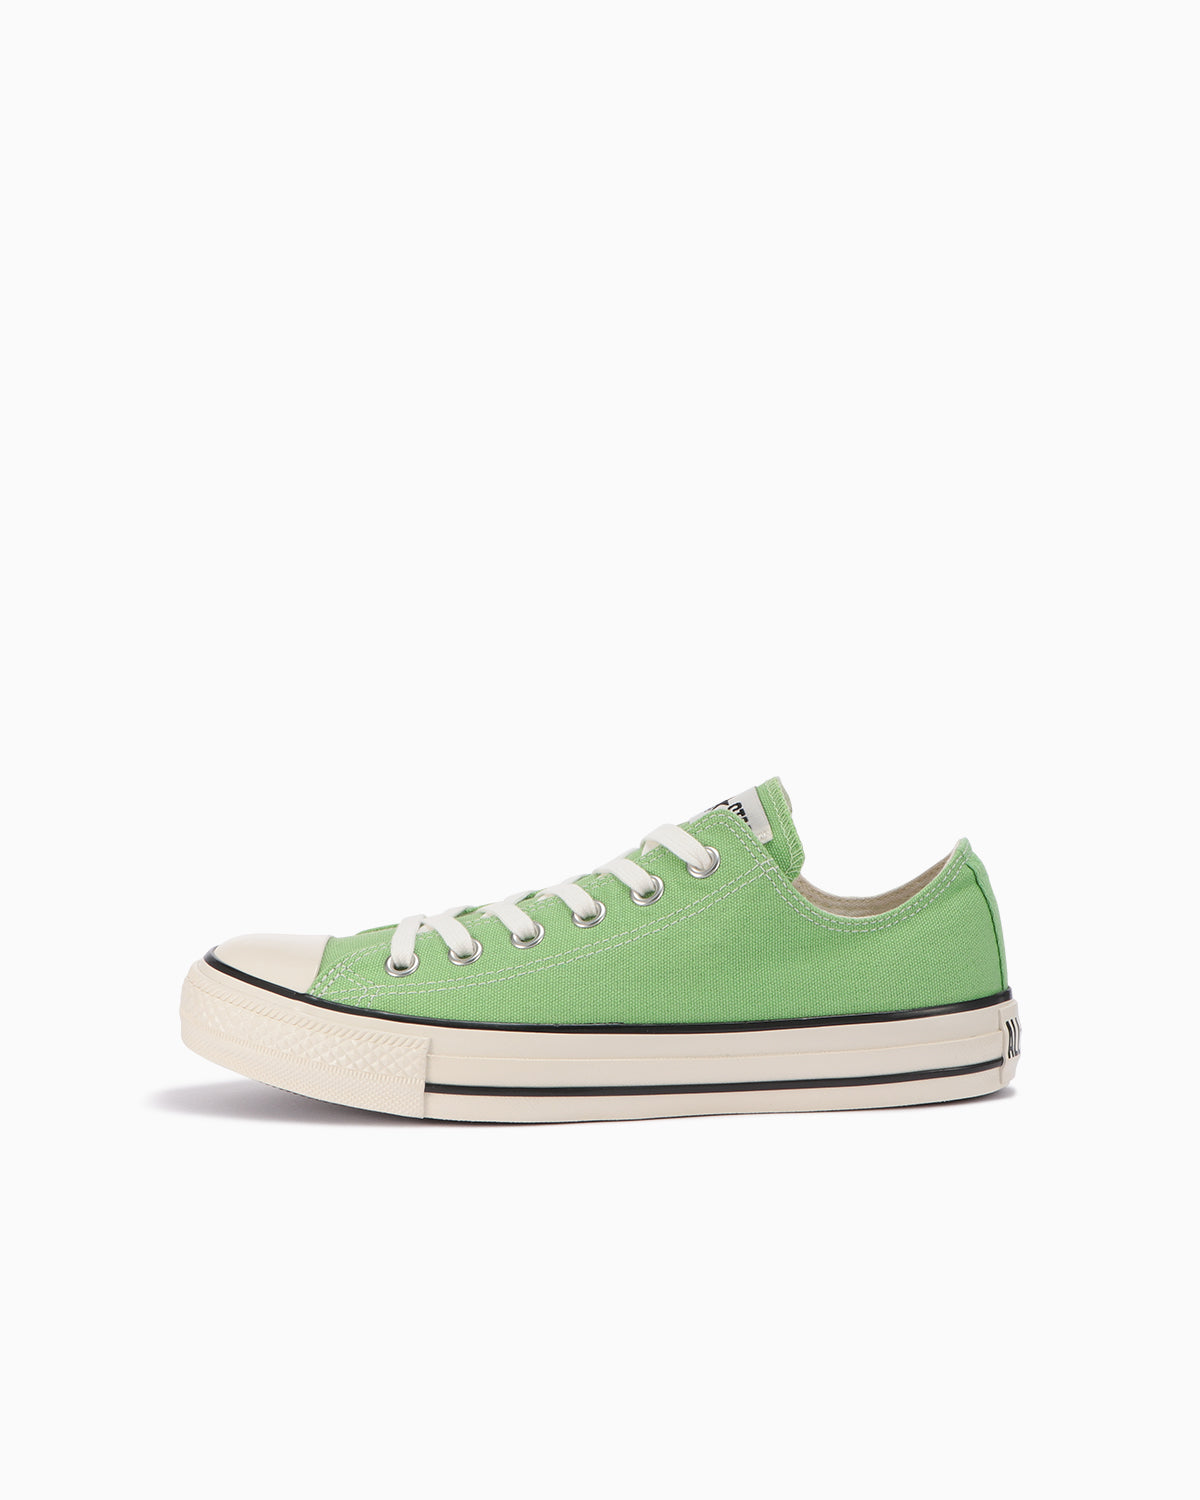 CONVERSE ALL STAR US COLORS OX 28.0cmL09248